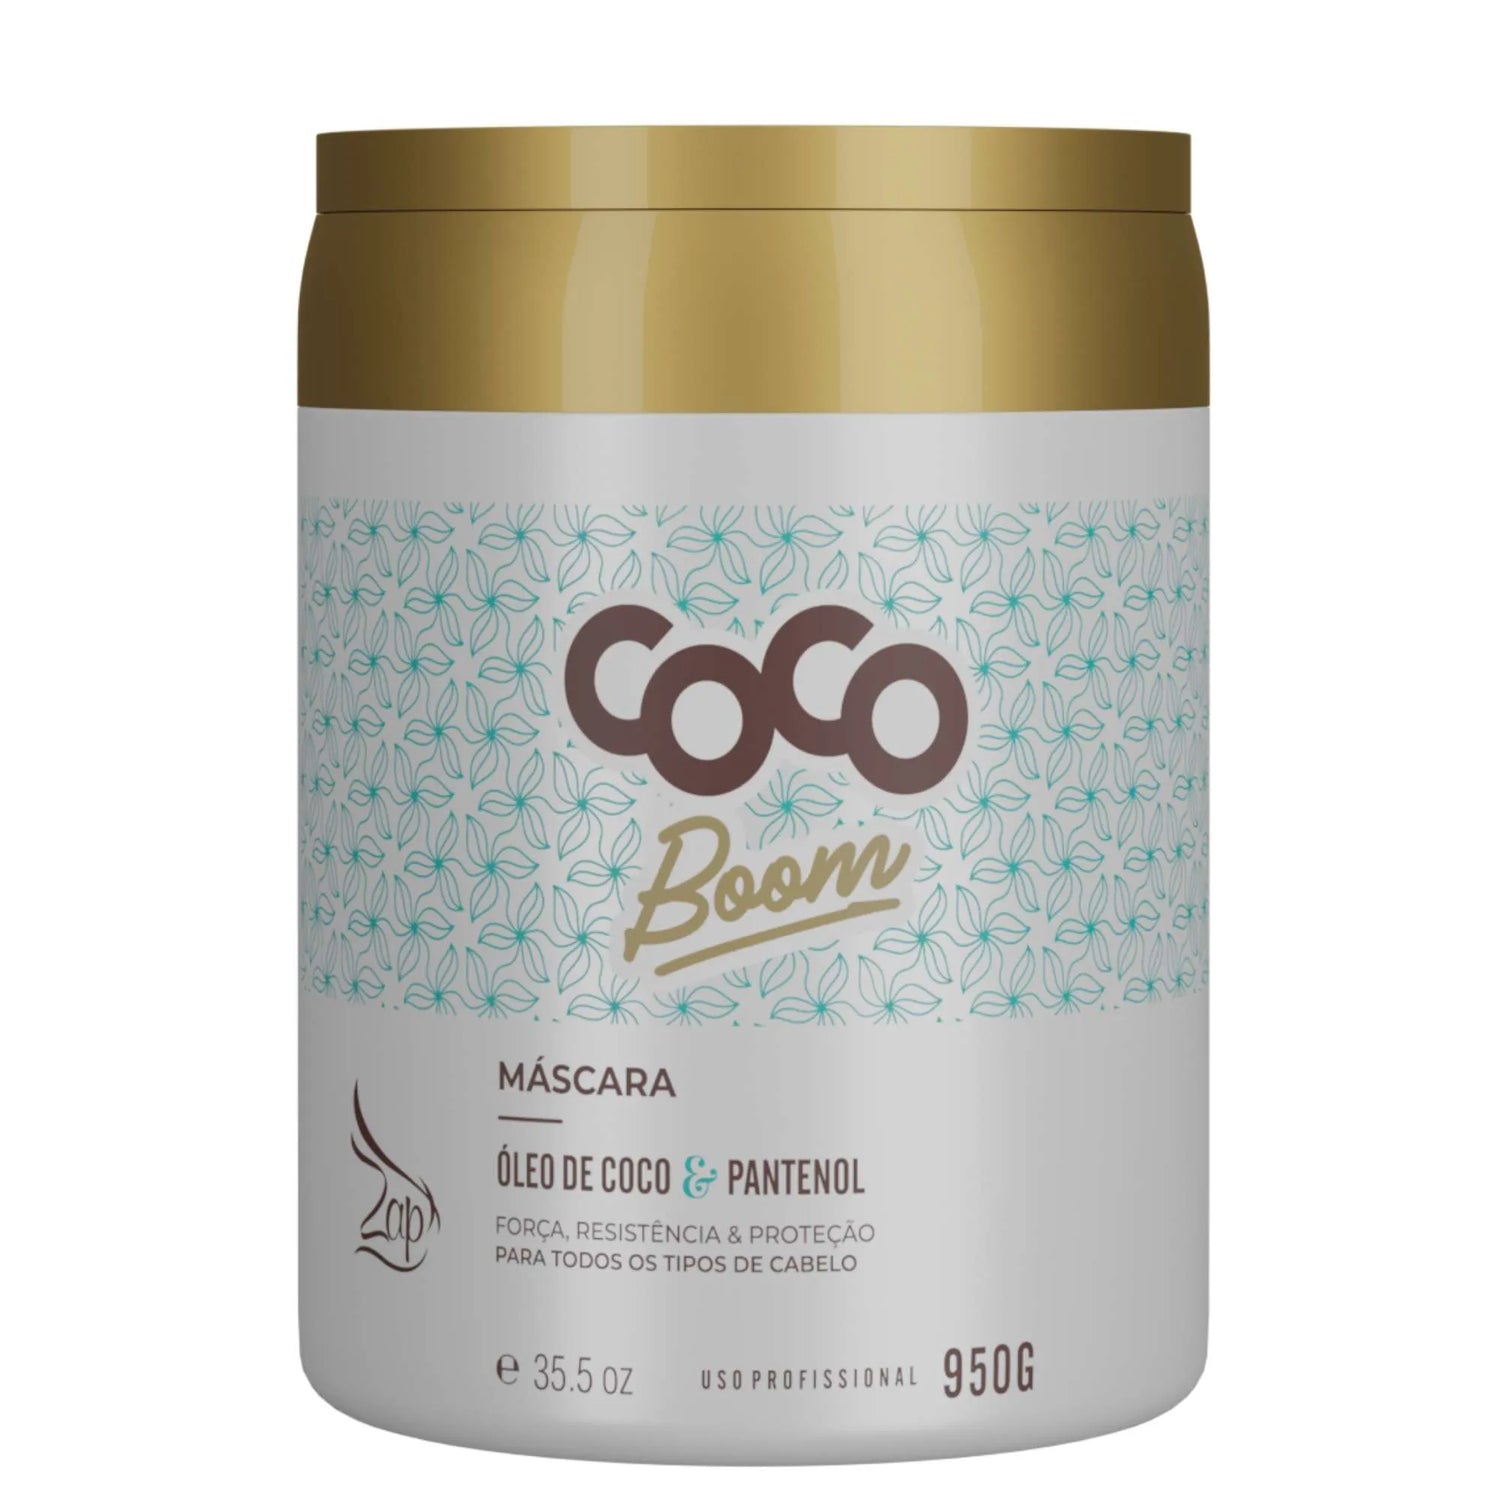 Zap Cosmeticos, Coco Boom, Hair Mask For Hair, 950g